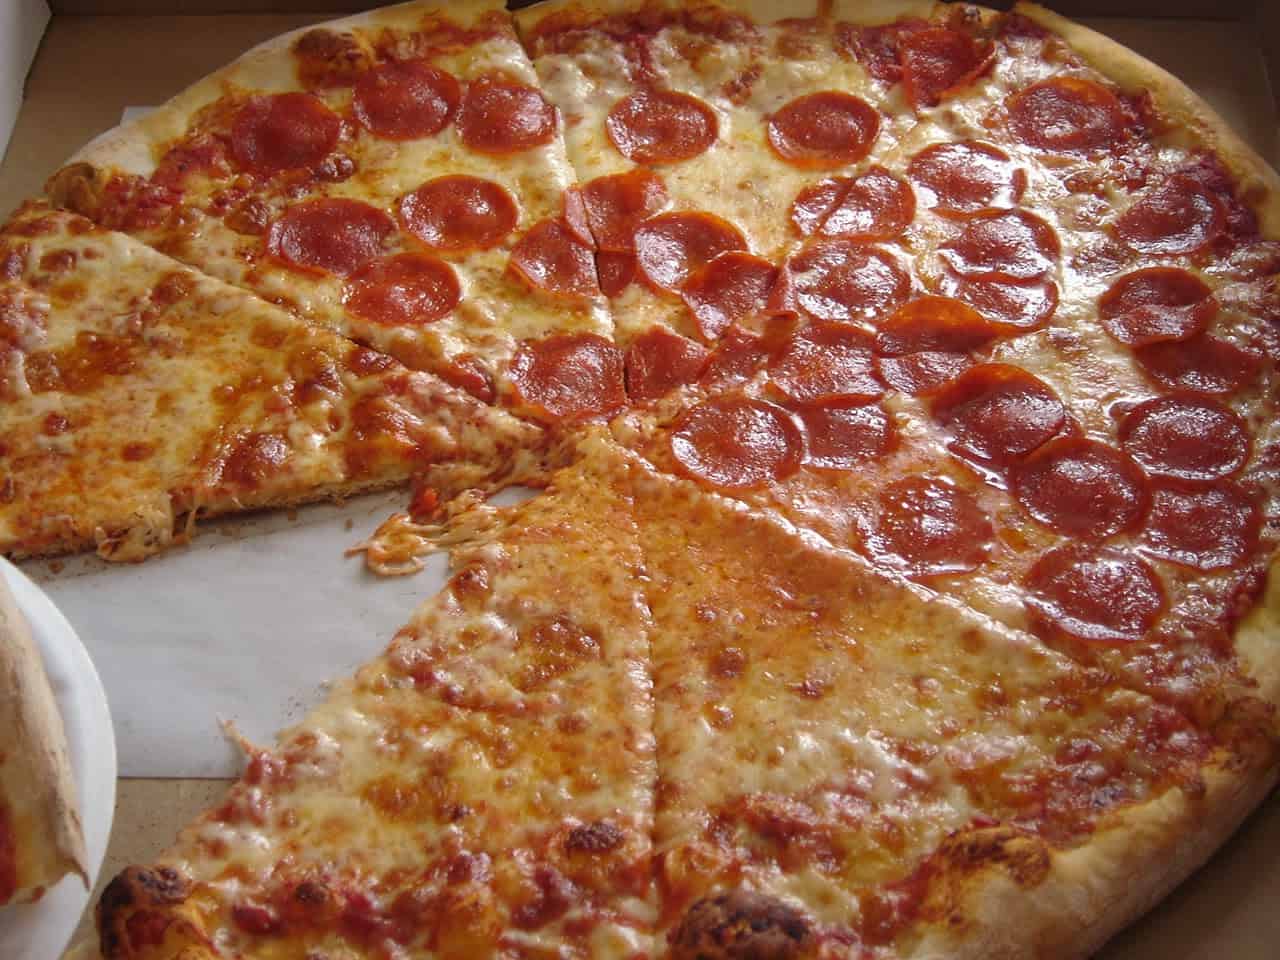 2018 Wildwood Pizza Tour Awards Best Pizza To